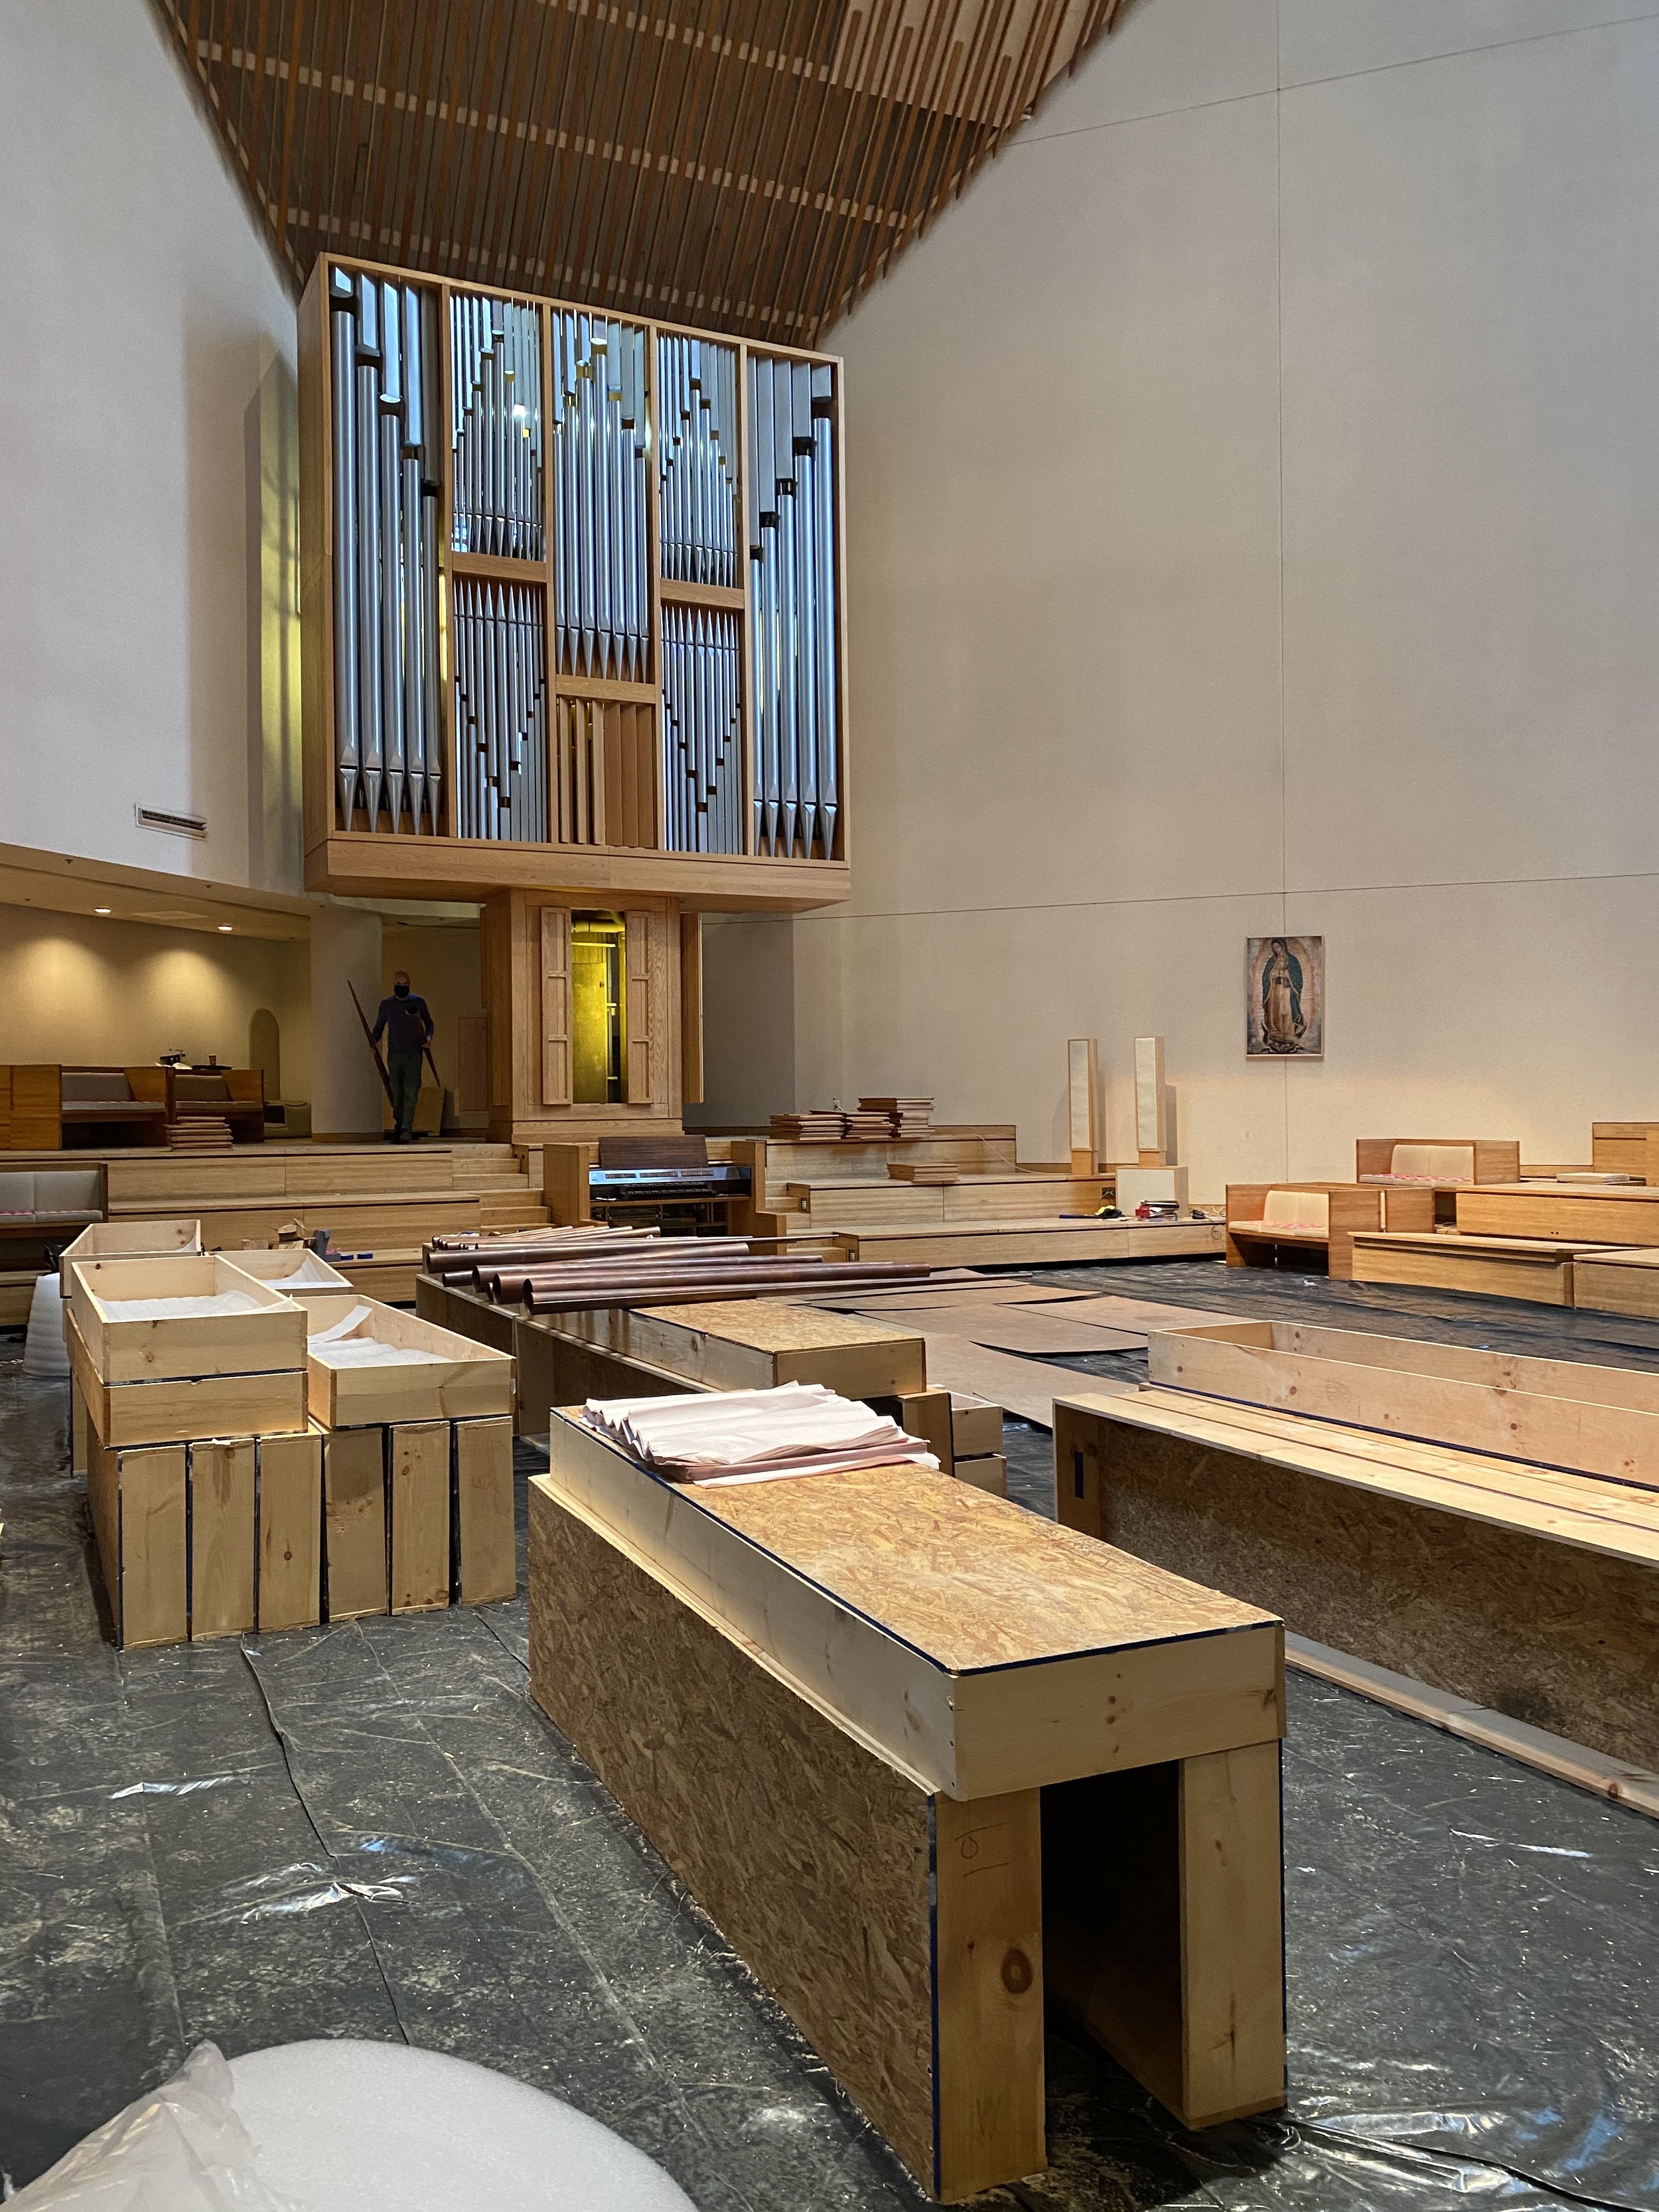   REMOVAL    January 2021   To prevent further damage following the water main break, Saint Peter’s Sanctuary Organ was disassembled and removed. Crates were built on site to fit and organize the exact pieces of the organ and prepare them for transpo